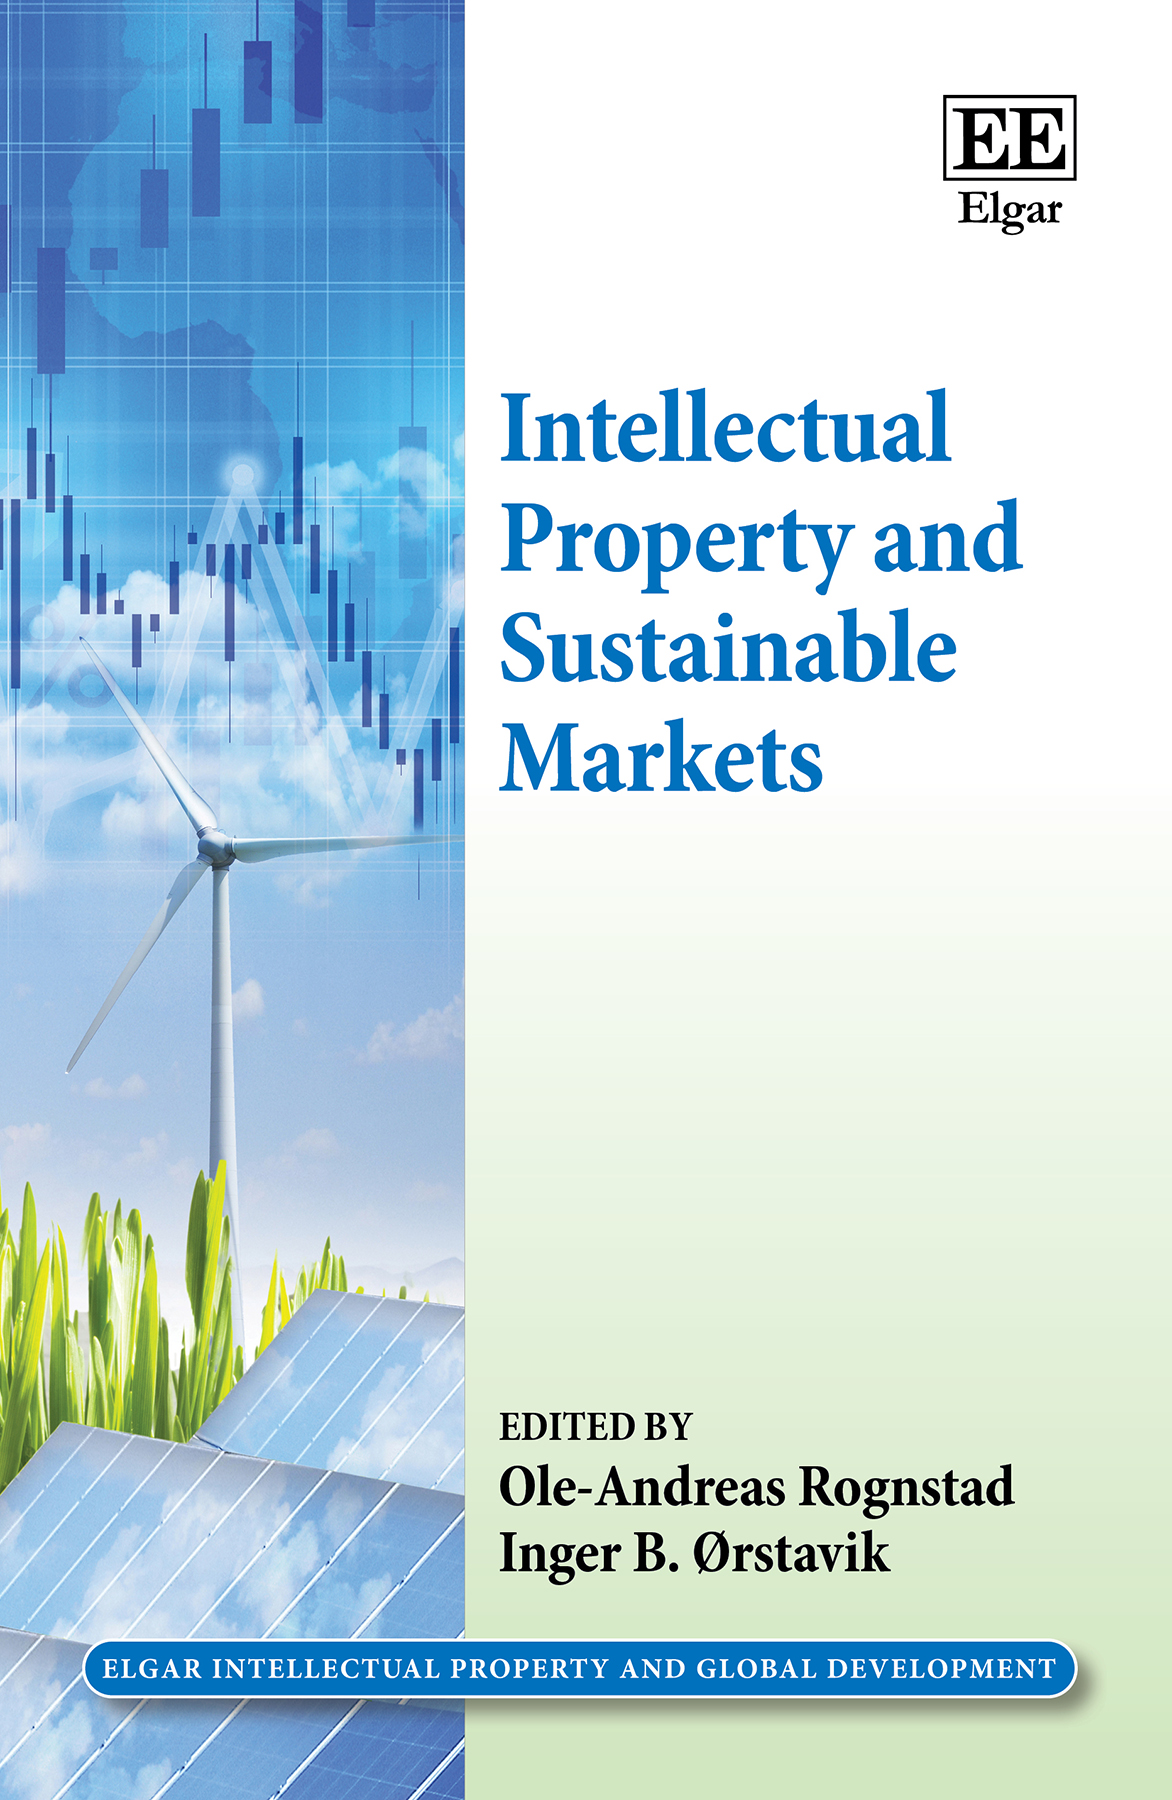 Intellectual Property and Sustainable Markets